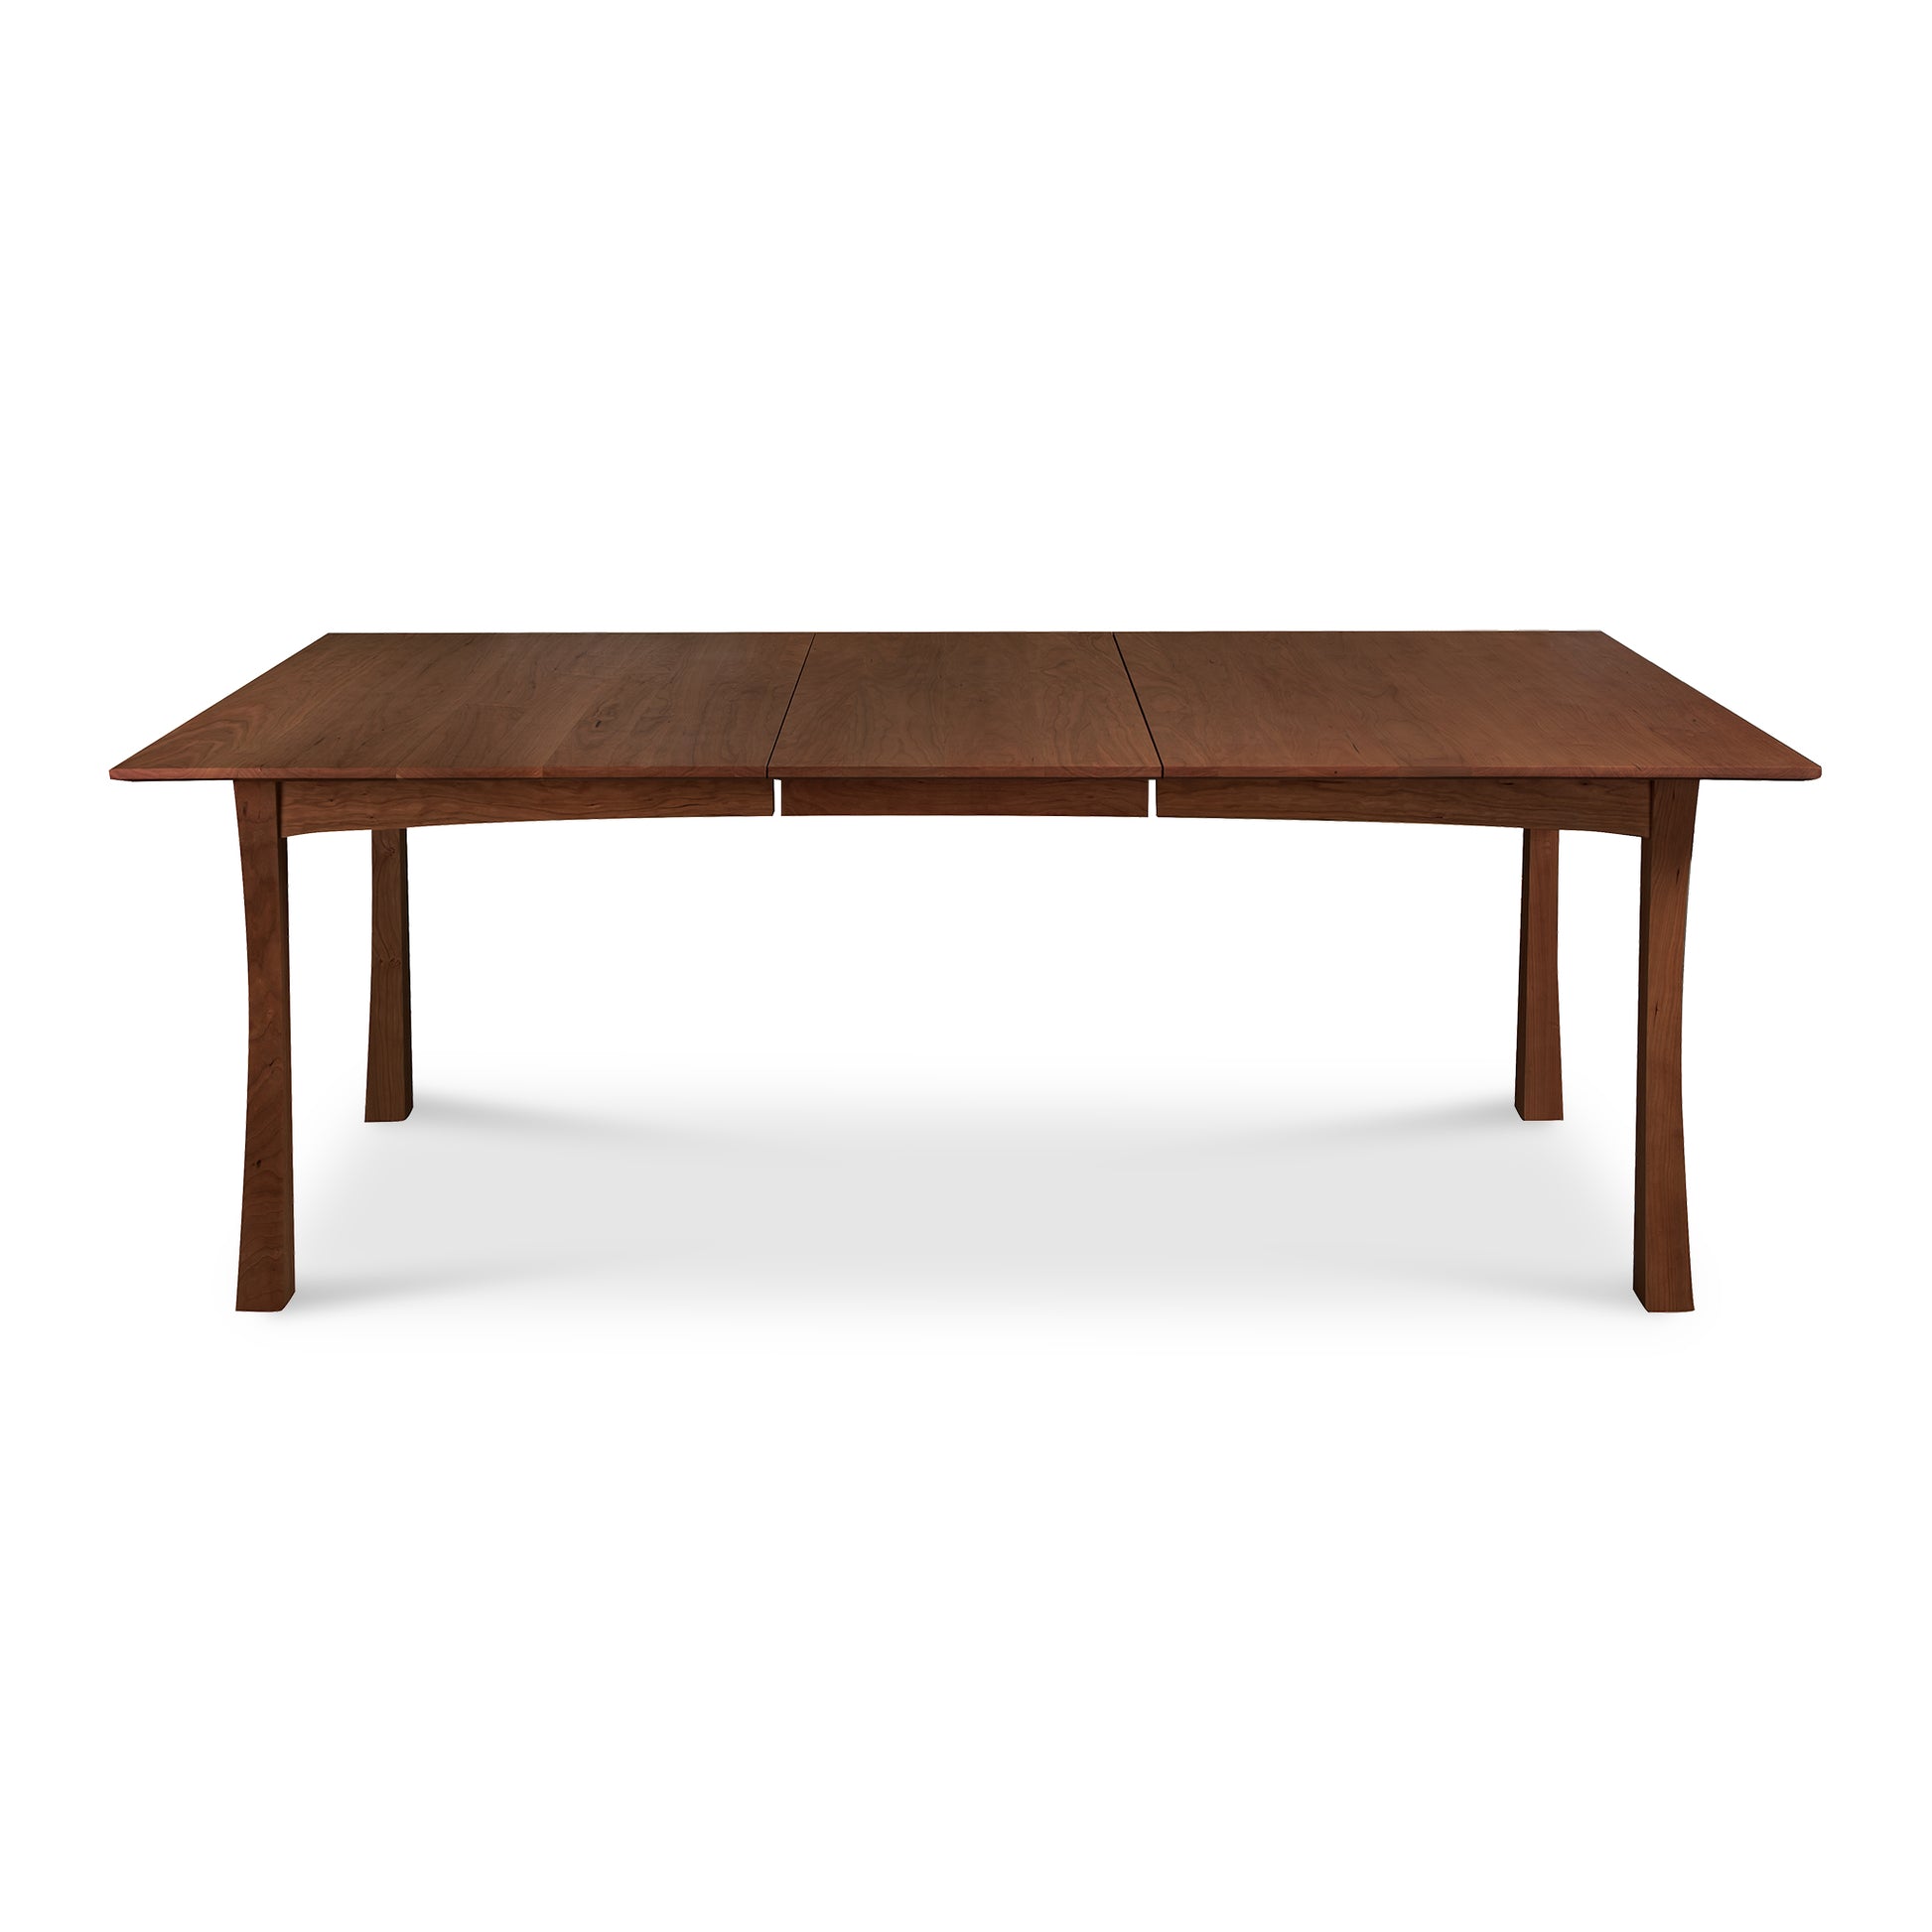 A Contemporary Craftsman Extension Dining Table with extendable leaves, handcrafted by Vermont woodworkers from Vermont Furniture Designs, against a white background.